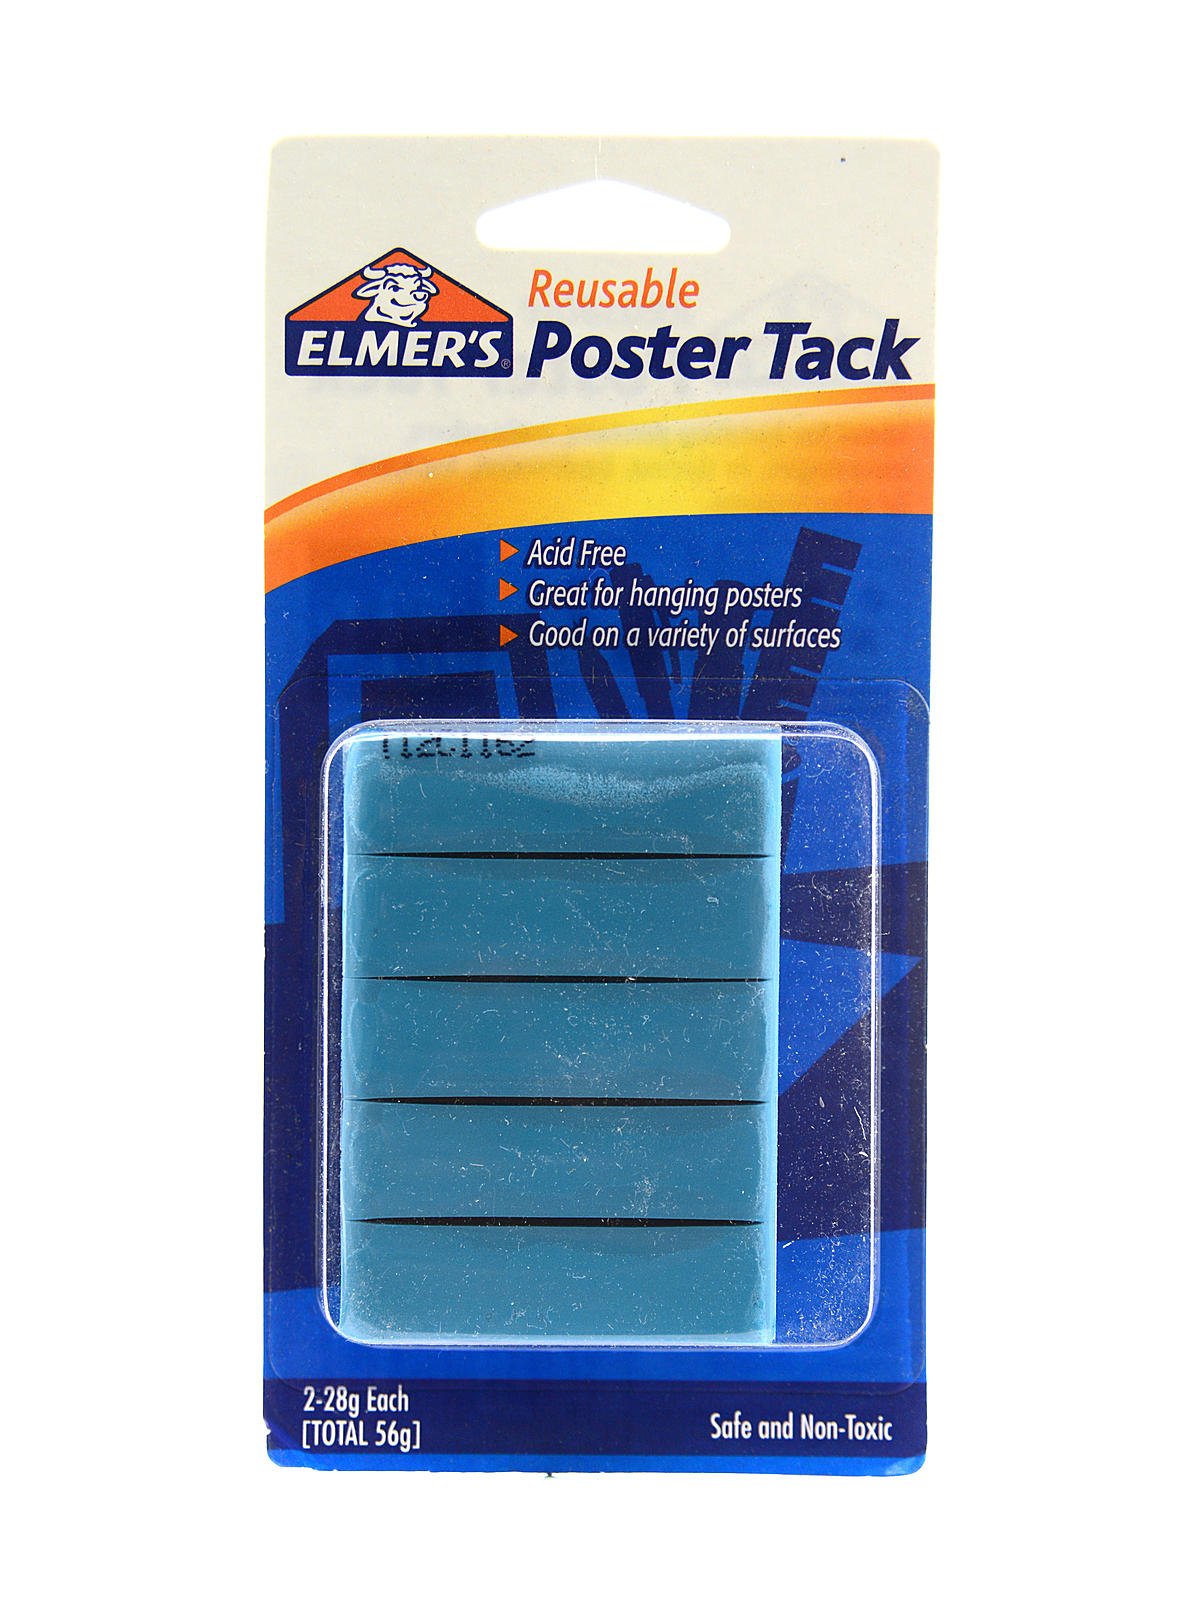 Elmers Poster Tack, Reusable, Artist And Hobby Supplies